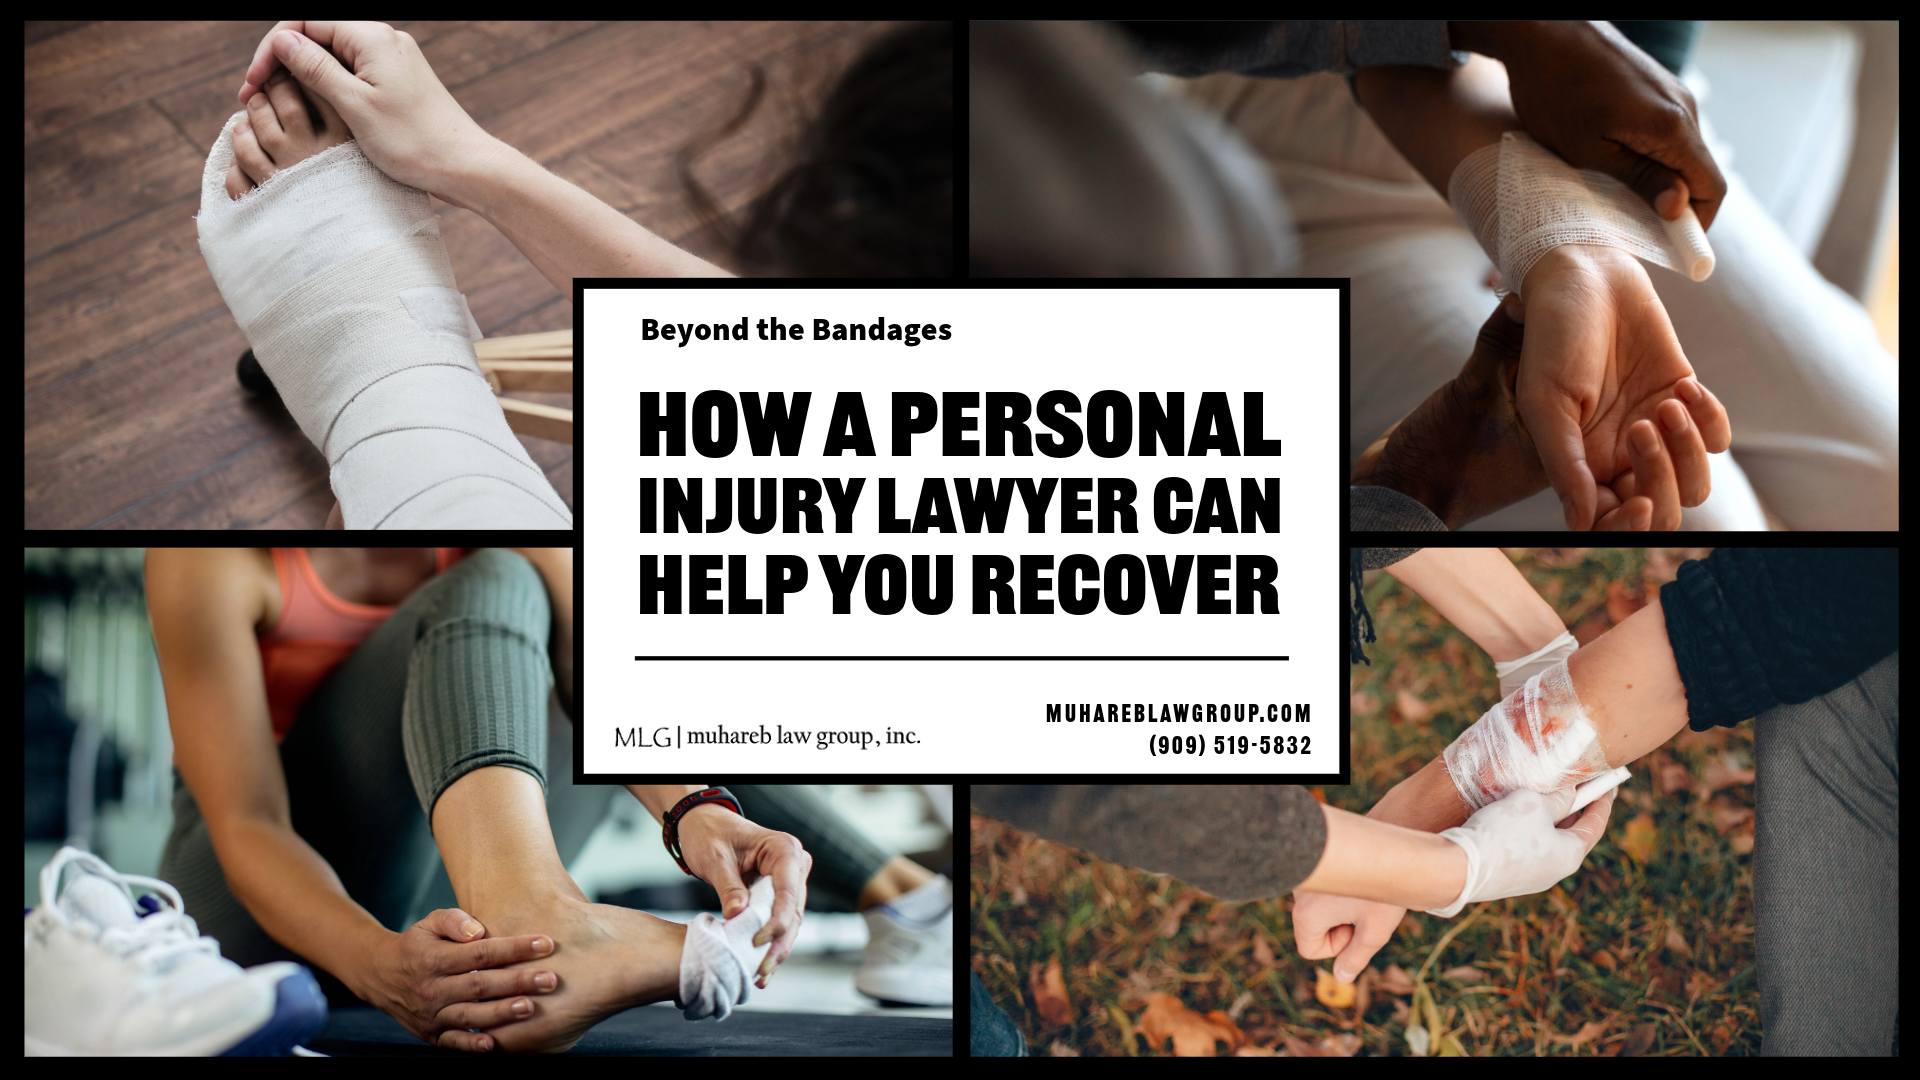 Beyond the Bandages: How a Personal Injury Lawyer Can Help You Recover